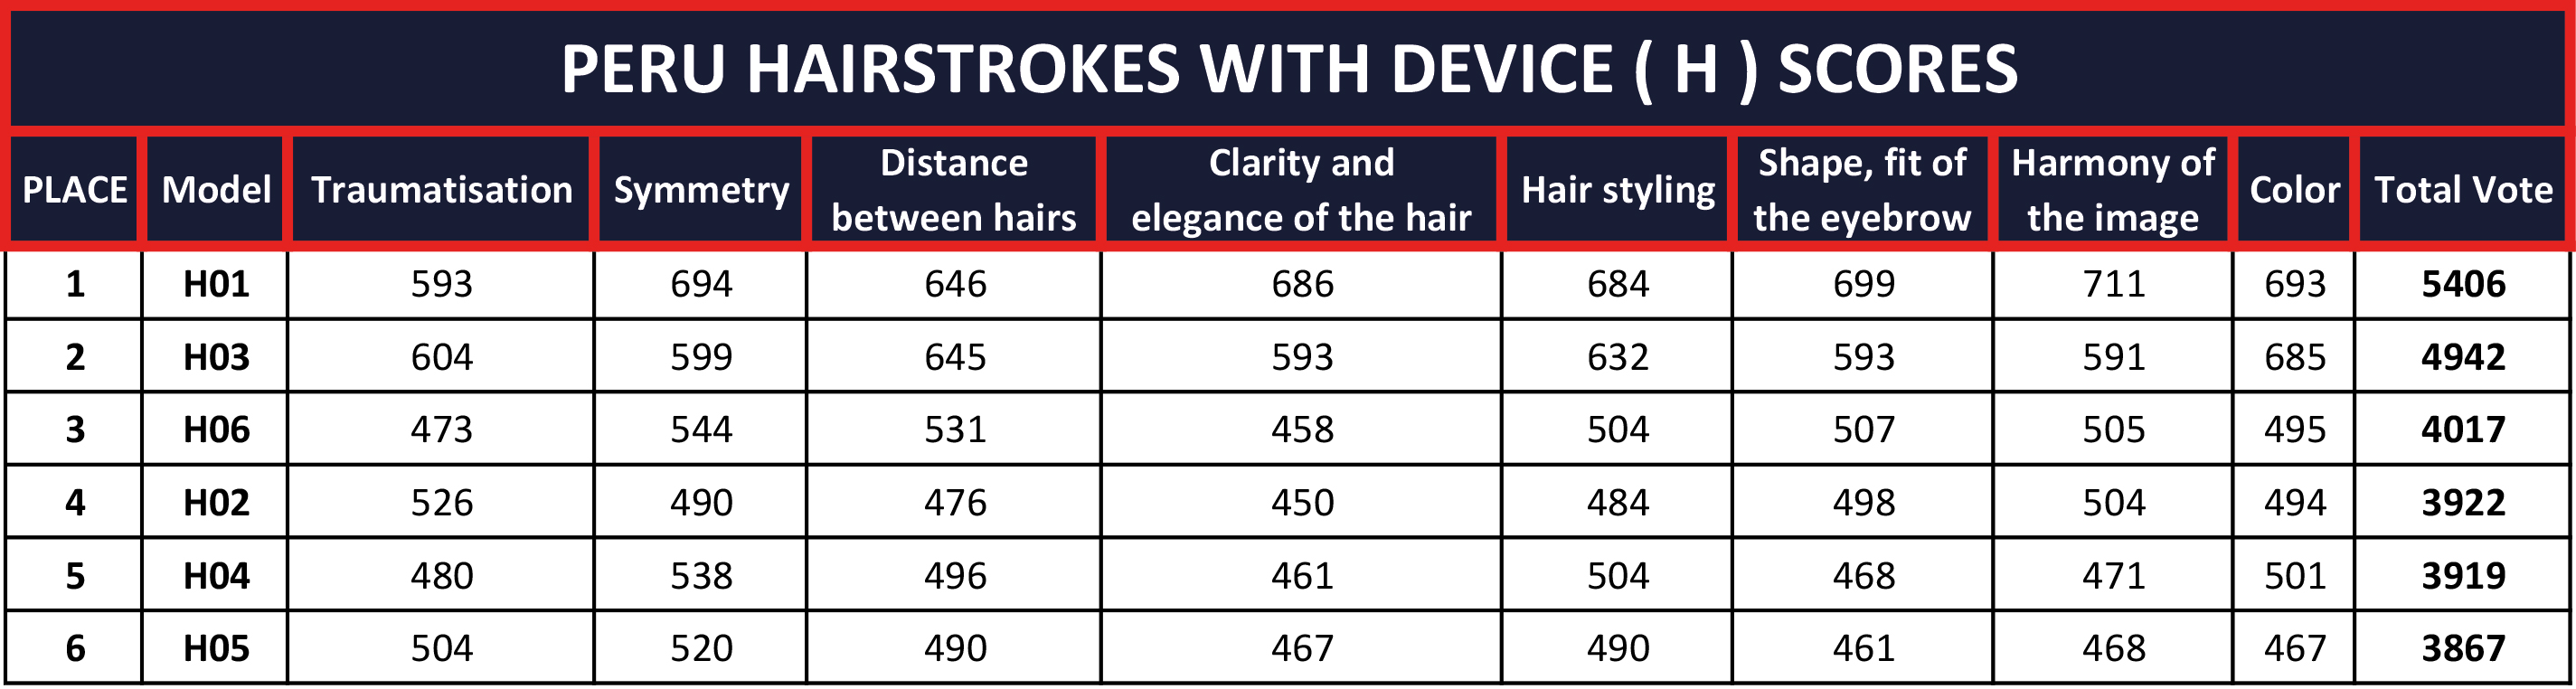 PERU-HAIRSTROKES-WITH-DEVICE-(-H-)-SCORES